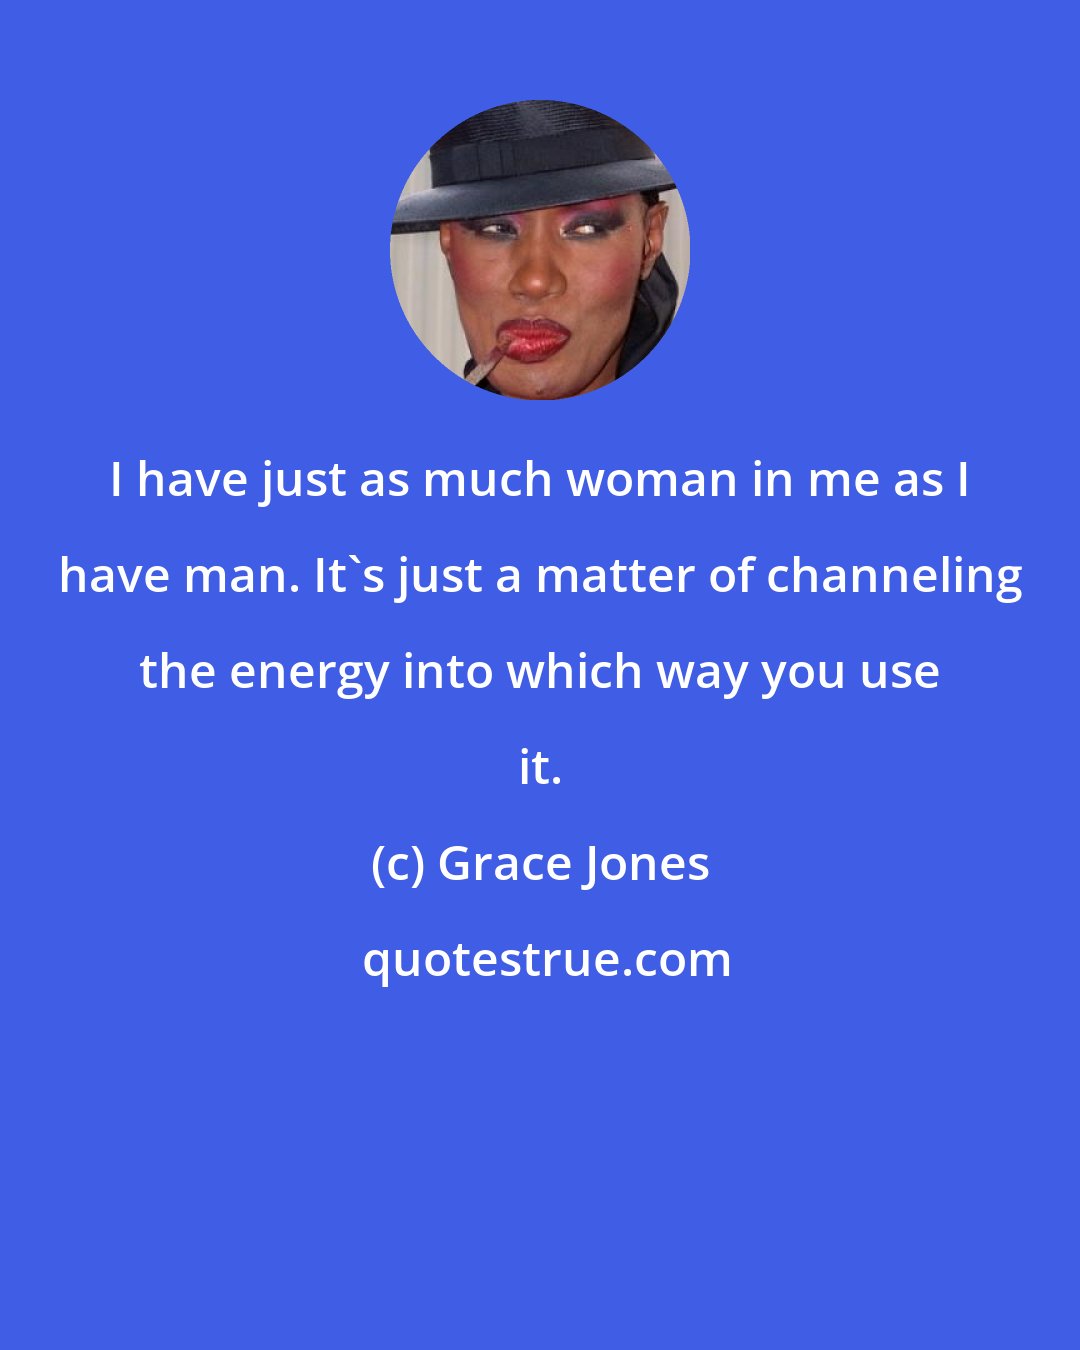 Grace Jones: I have just as much woman in me as I have man. It's just a matter of channeling the energy into which way you use it.